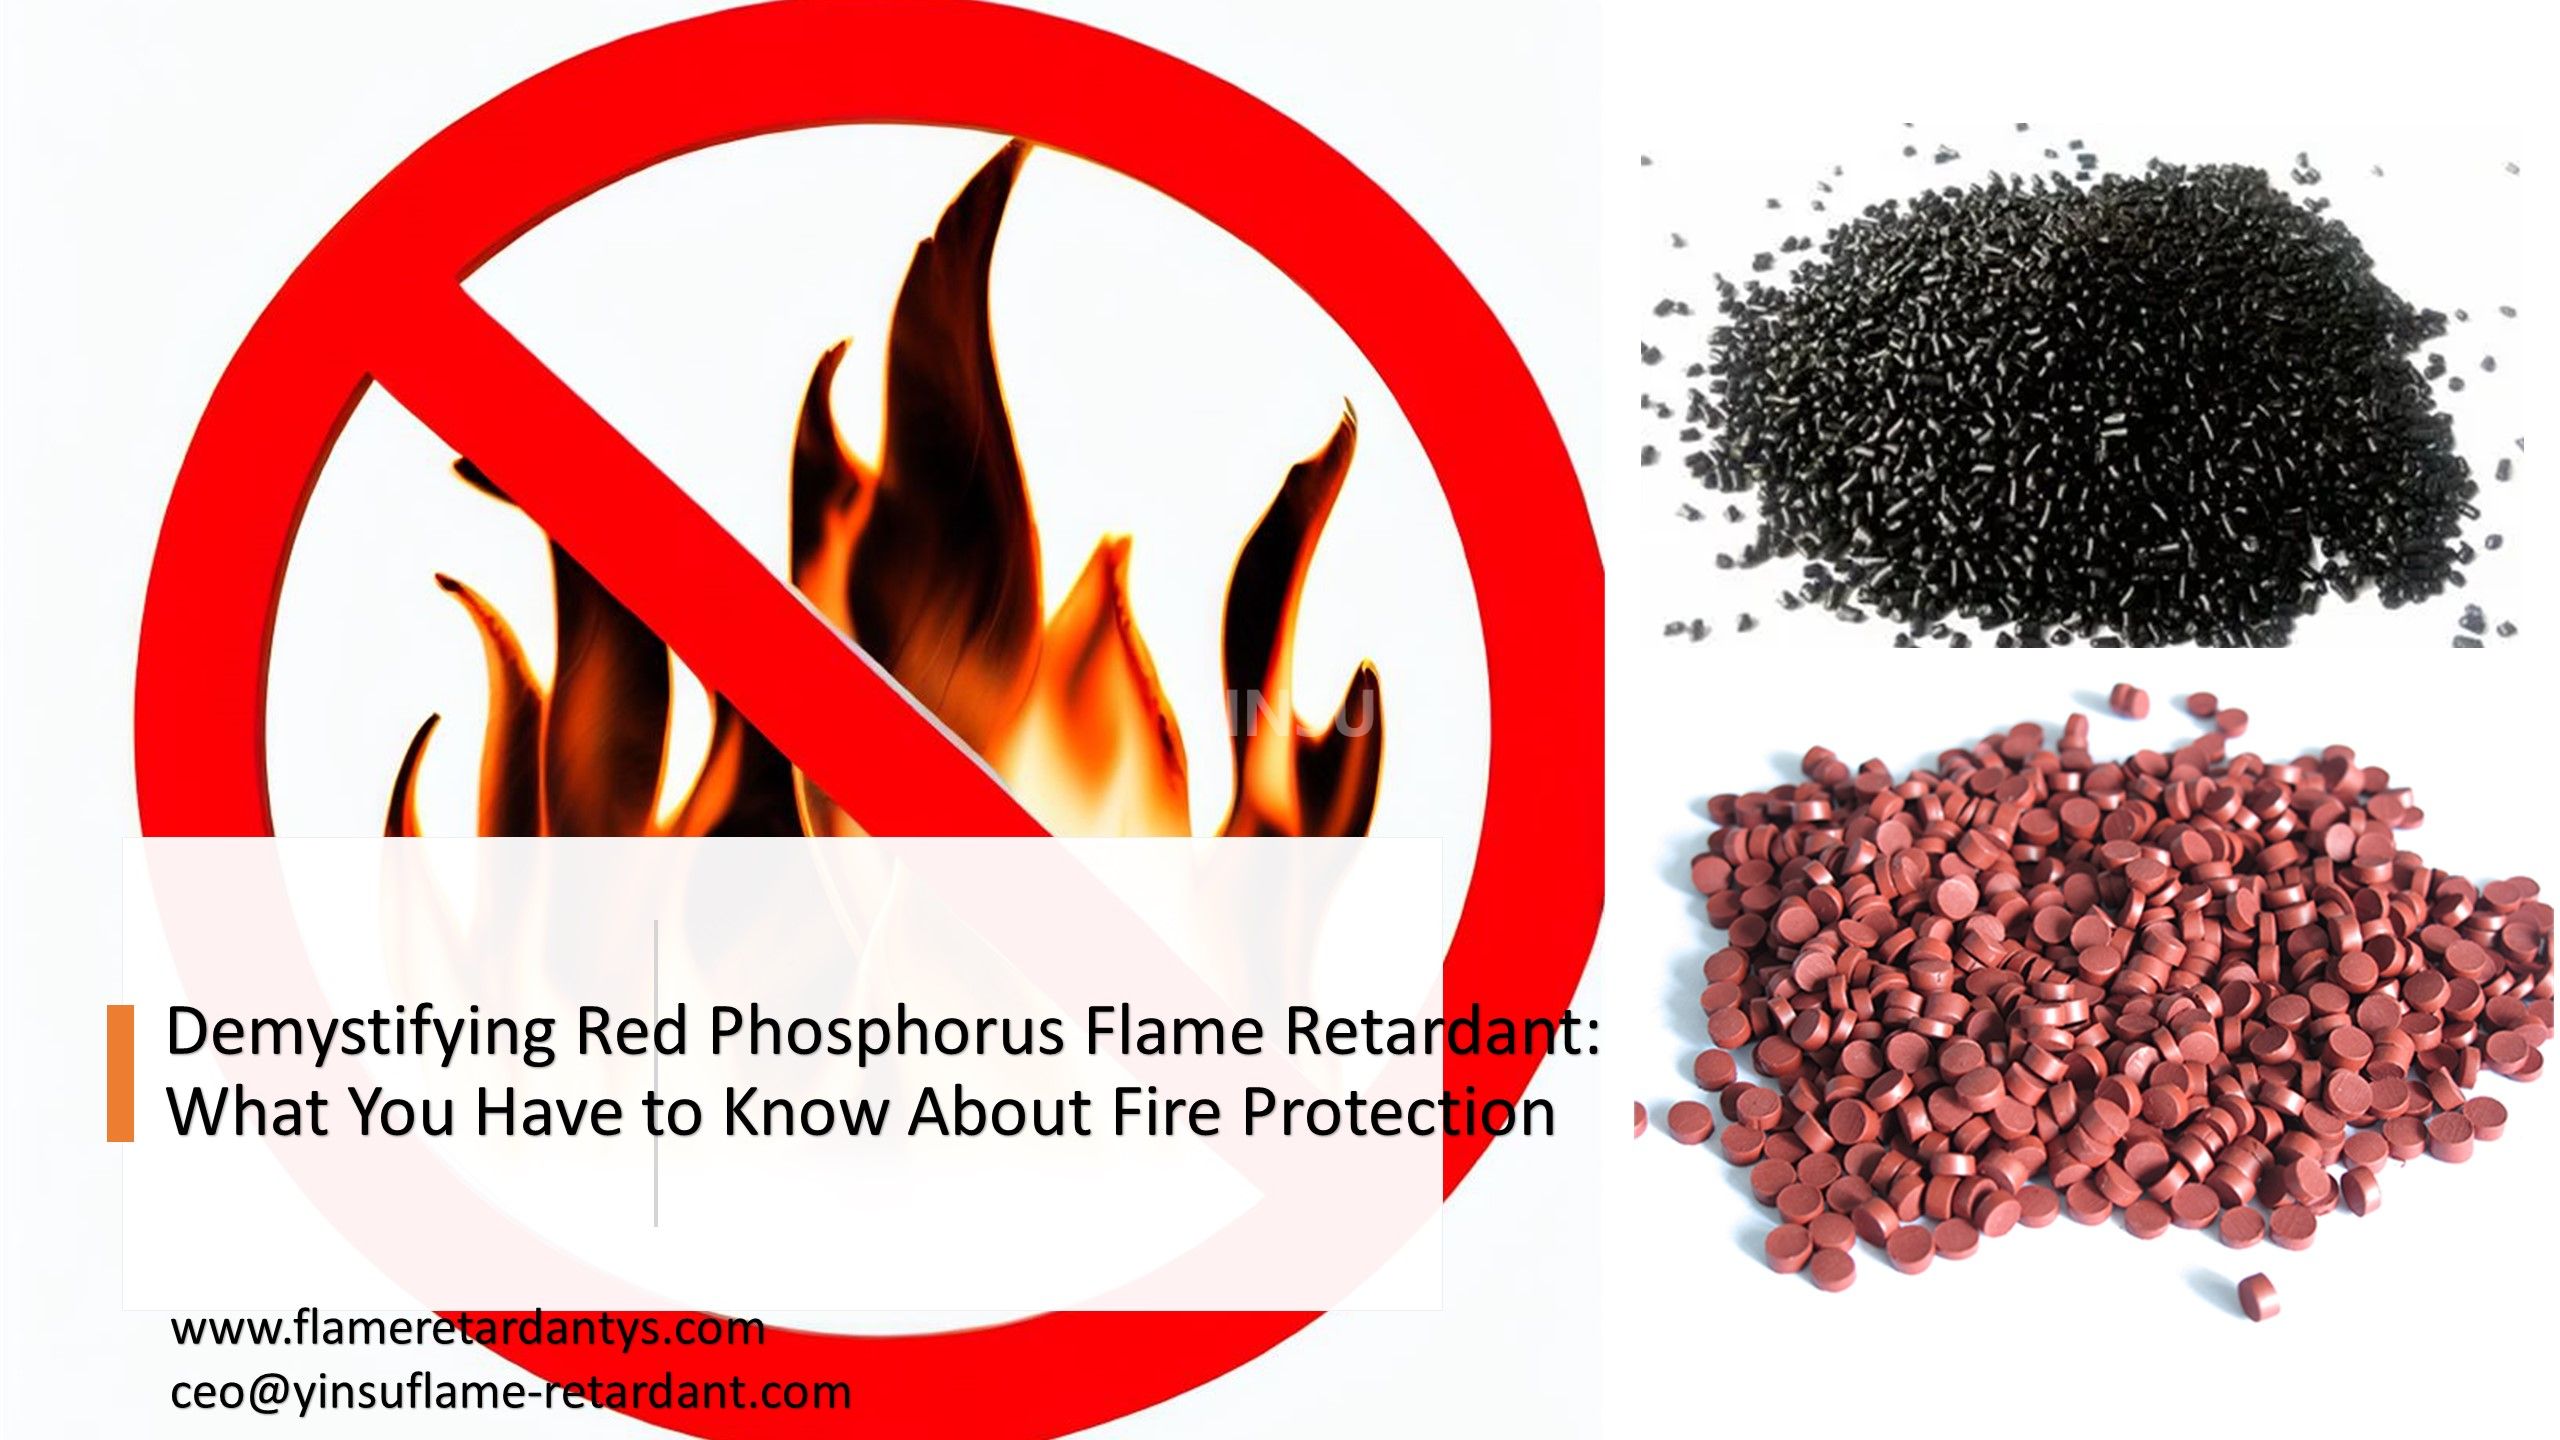 Demystifying Red Phosphorus Flame Retardant: What You Have to Know About Fire Protection